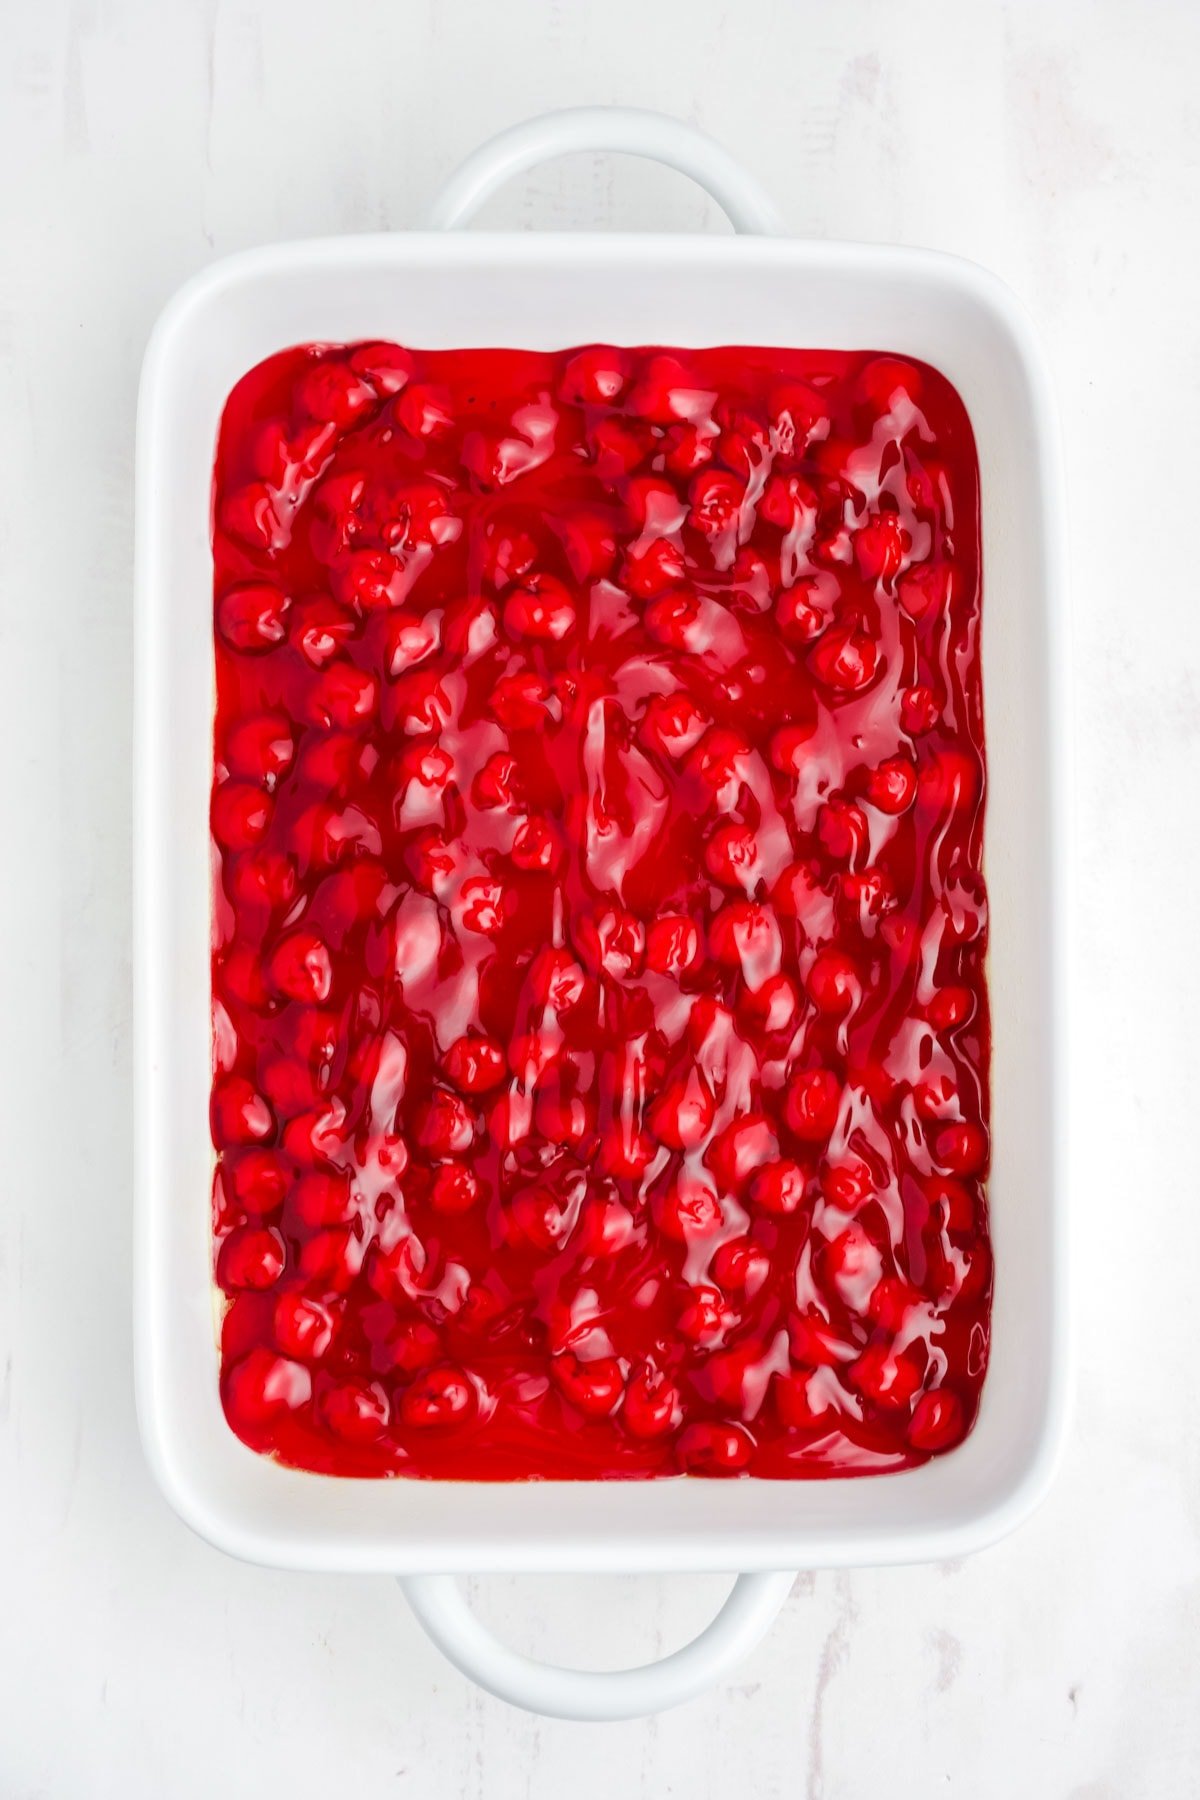 Cherry Pie filling spread into the bottom of a baking dish.